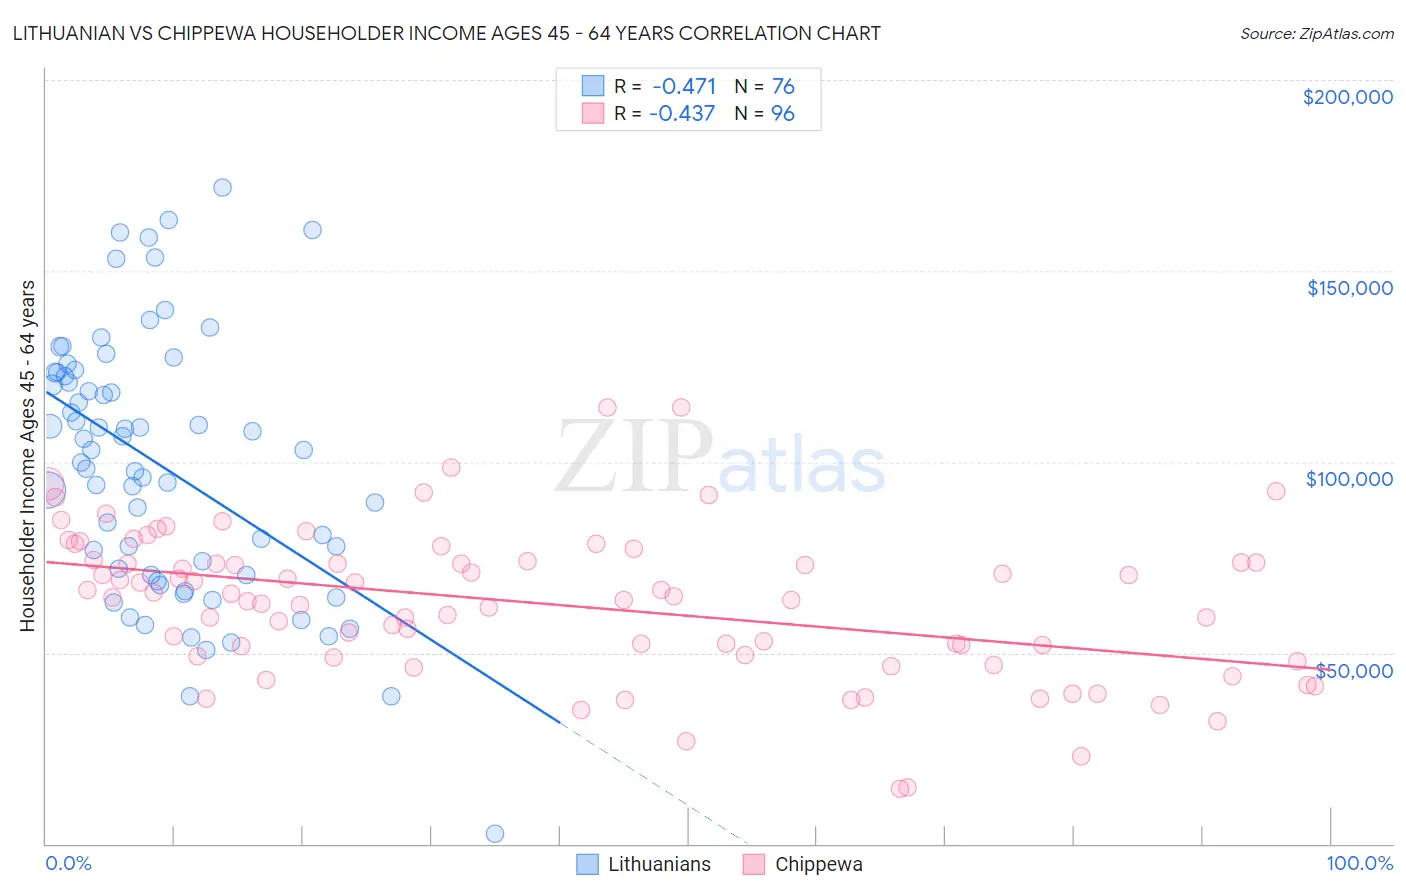 Lithuanian vs Chippewa Householder Income Ages 45 - 64 years